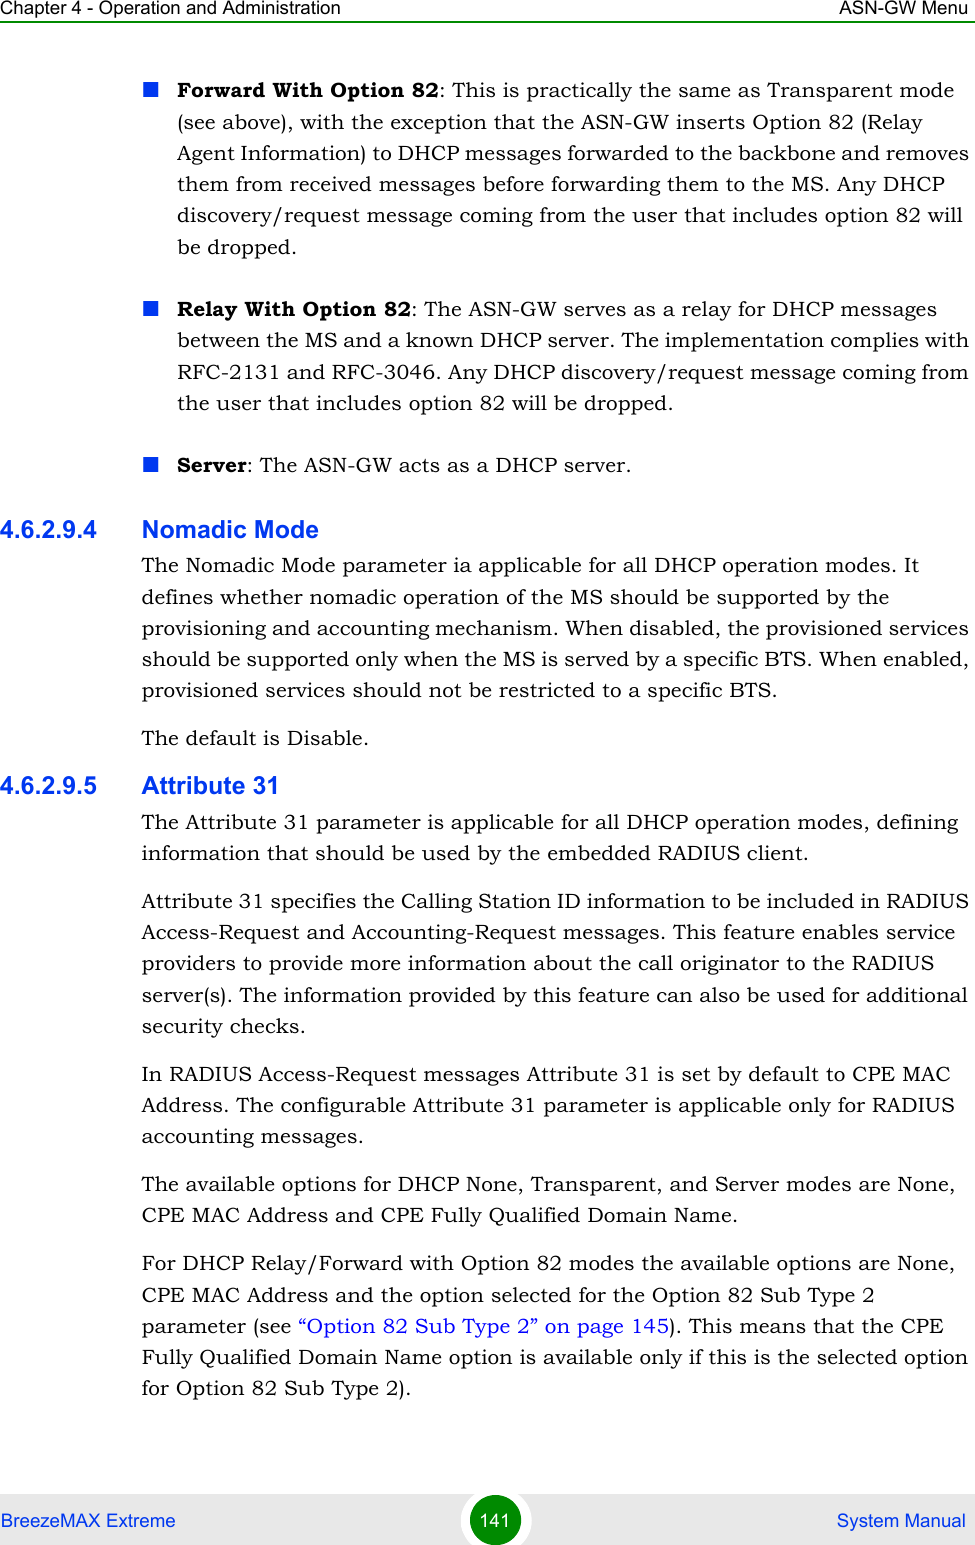 Chapter 4 - Operation and Administration ASN-GW MenuBreezeMAX Extreme 141  System ManualForward With Option 82: This is practically the same as Transparent mode (see above), with the exception that the ASN-GW inserts Option 82 (Relay Agent Information) to DHCP messages forwarded to the backbone and removes them from received messages before forwarding them to the MS. Any DHCP discovery/request message coming from the user that includes option 82 will be dropped.Relay With Option 82: The ASN-GW serves as a relay for DHCP messages between the MS and a known DHCP server. The implementation complies with RFC-2131 and RFC-3046. Any DHCP discovery/request message coming from the user that includes option 82 will be dropped.Server: The ASN-GW acts as a DHCP server.4.6.2.9.4 Nomadic ModeThe Nomadic Mode parameter ia applicable for all DHCP operation modes. It defines whether nomadic operation of the MS should be supported by the provisioning and accounting mechanism. When disabled, the provisioned services should be supported only when the MS is served by a specific BTS. When enabled, provisioned services should not be restricted to a specific BTS.The default is Disable.4.6.2.9.5 Attribute 31The Attribute 31 parameter is applicable for all DHCP operation modes, defining information that should be used by the embedded RADIUS client. Attribute 31 specifies the Calling Station ID information to be included in RADIUS Access-Request and Accounting-Request messages. This feature enables service providers to provide more information about the call originator to the RADIUS server(s). The information provided by this feature can also be used for additional security checks.In RADIUS Access-Request messages Attribute 31 is set by default to CPE MAC Address. The configurable Attribute 31 parameter is applicable only for RADIUS accounting messages.The available options for DHCP None, Transparent, and Server modes are None, CPE MAC Address and CPE Fully Qualified Domain Name.For DHCP Relay/Forward with Option 82 modes the available options are None, CPE MAC Address and the option selected for the Option 82 Sub Type 2 parameter (see “Option 82 Sub Type 2” on page 145). This means that the CPE Fully Qualified Domain Name option is available only if this is the selected option for Option 82 Sub Type 2). 